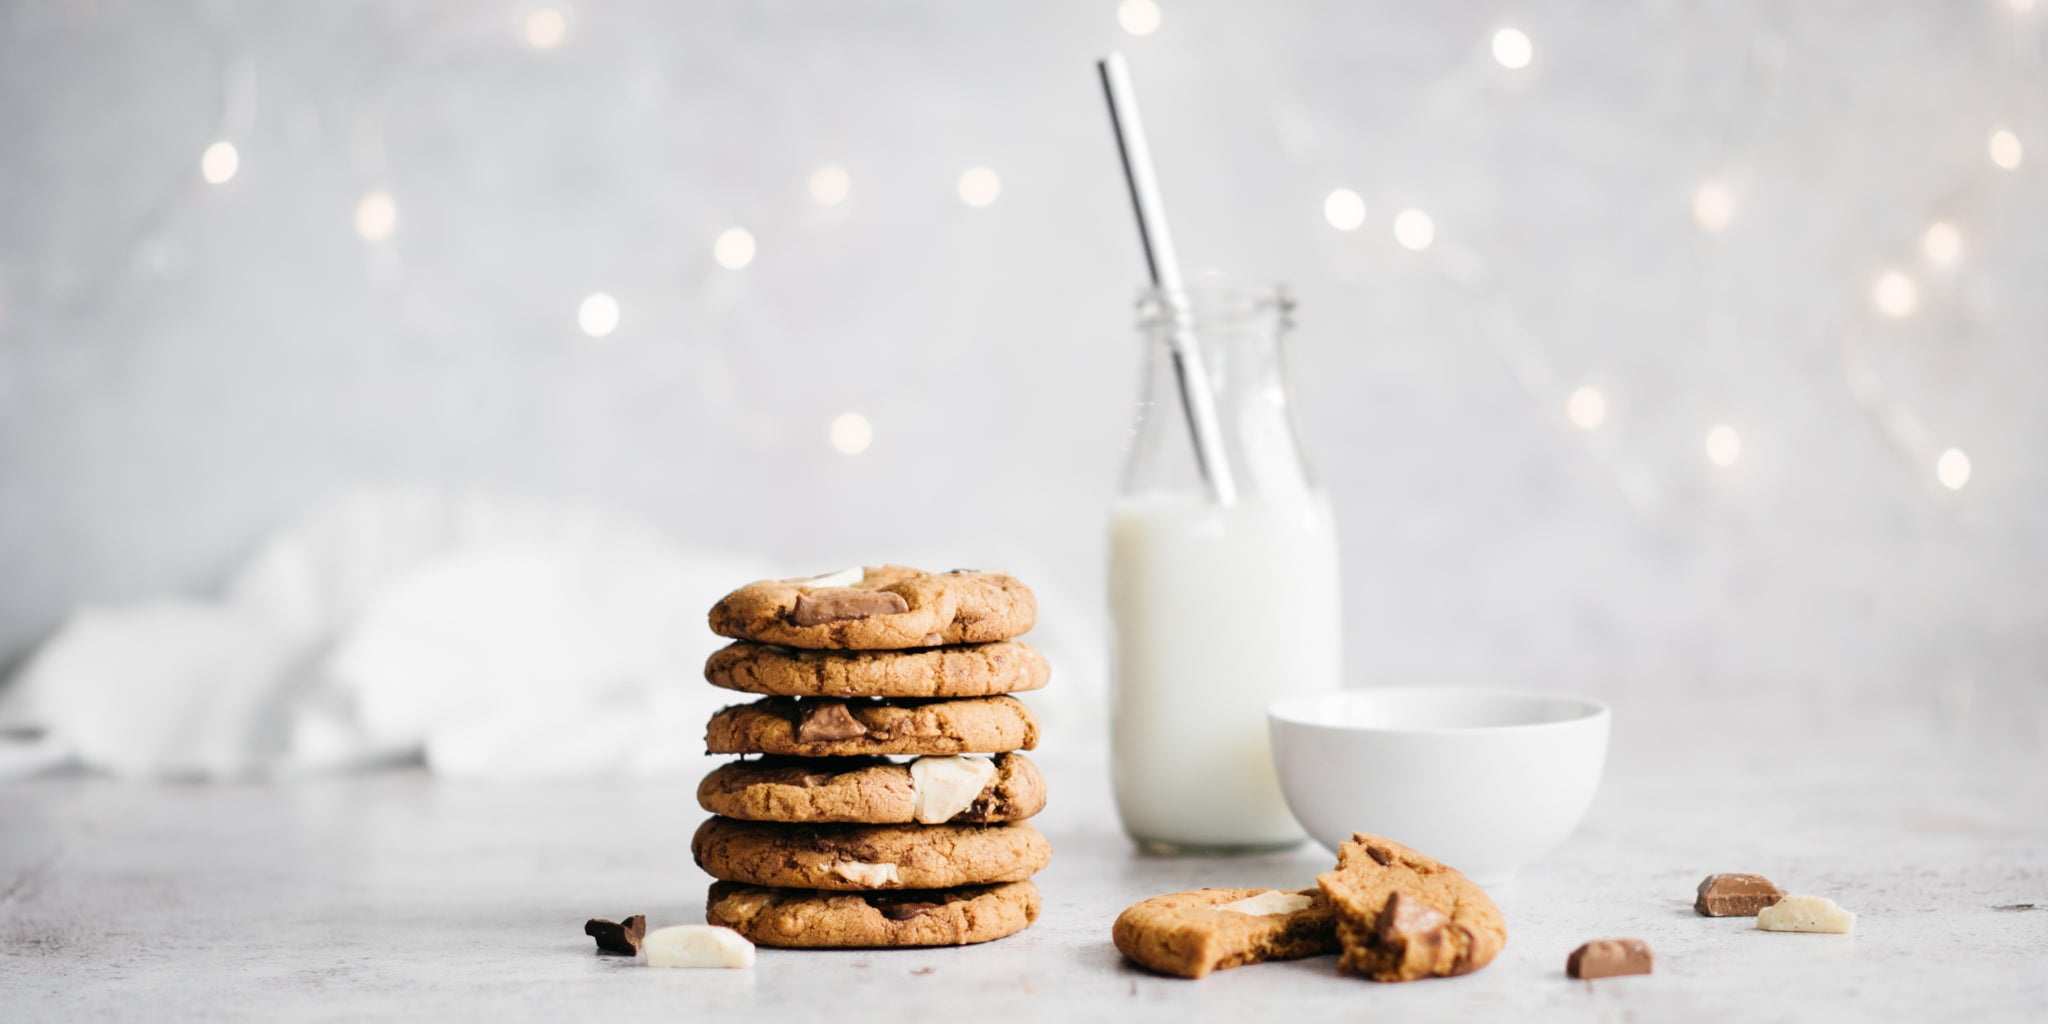 Stack of cookies in a pile with bottle of milk in background